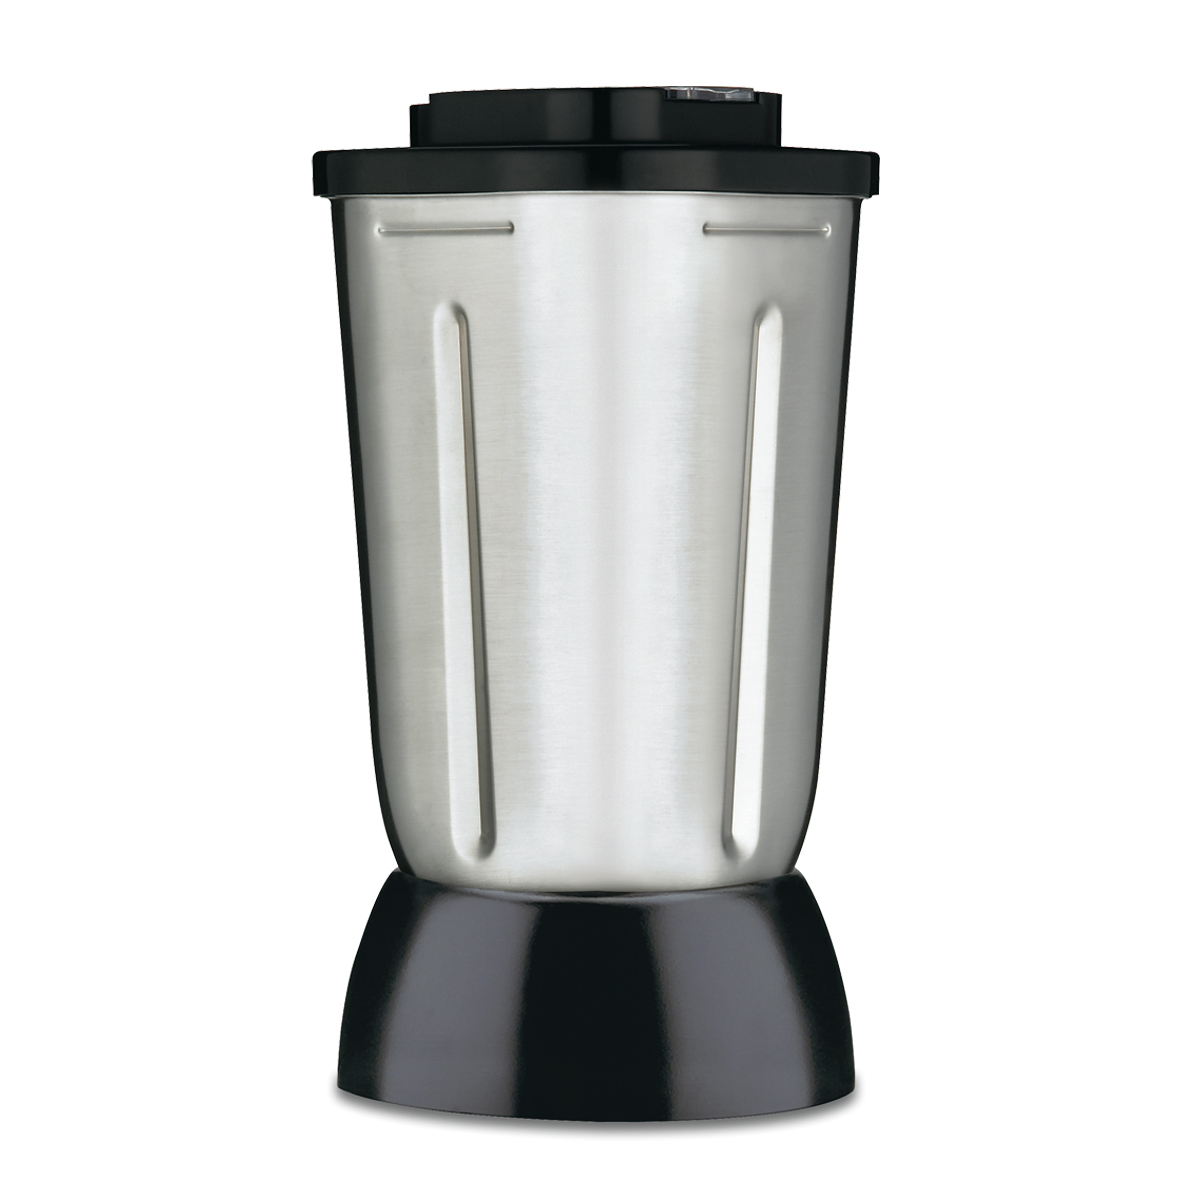 https://www.waringcommercialproducts.com/files/accessories/cac88-blender-container-with-blade-collar-lid.jpg